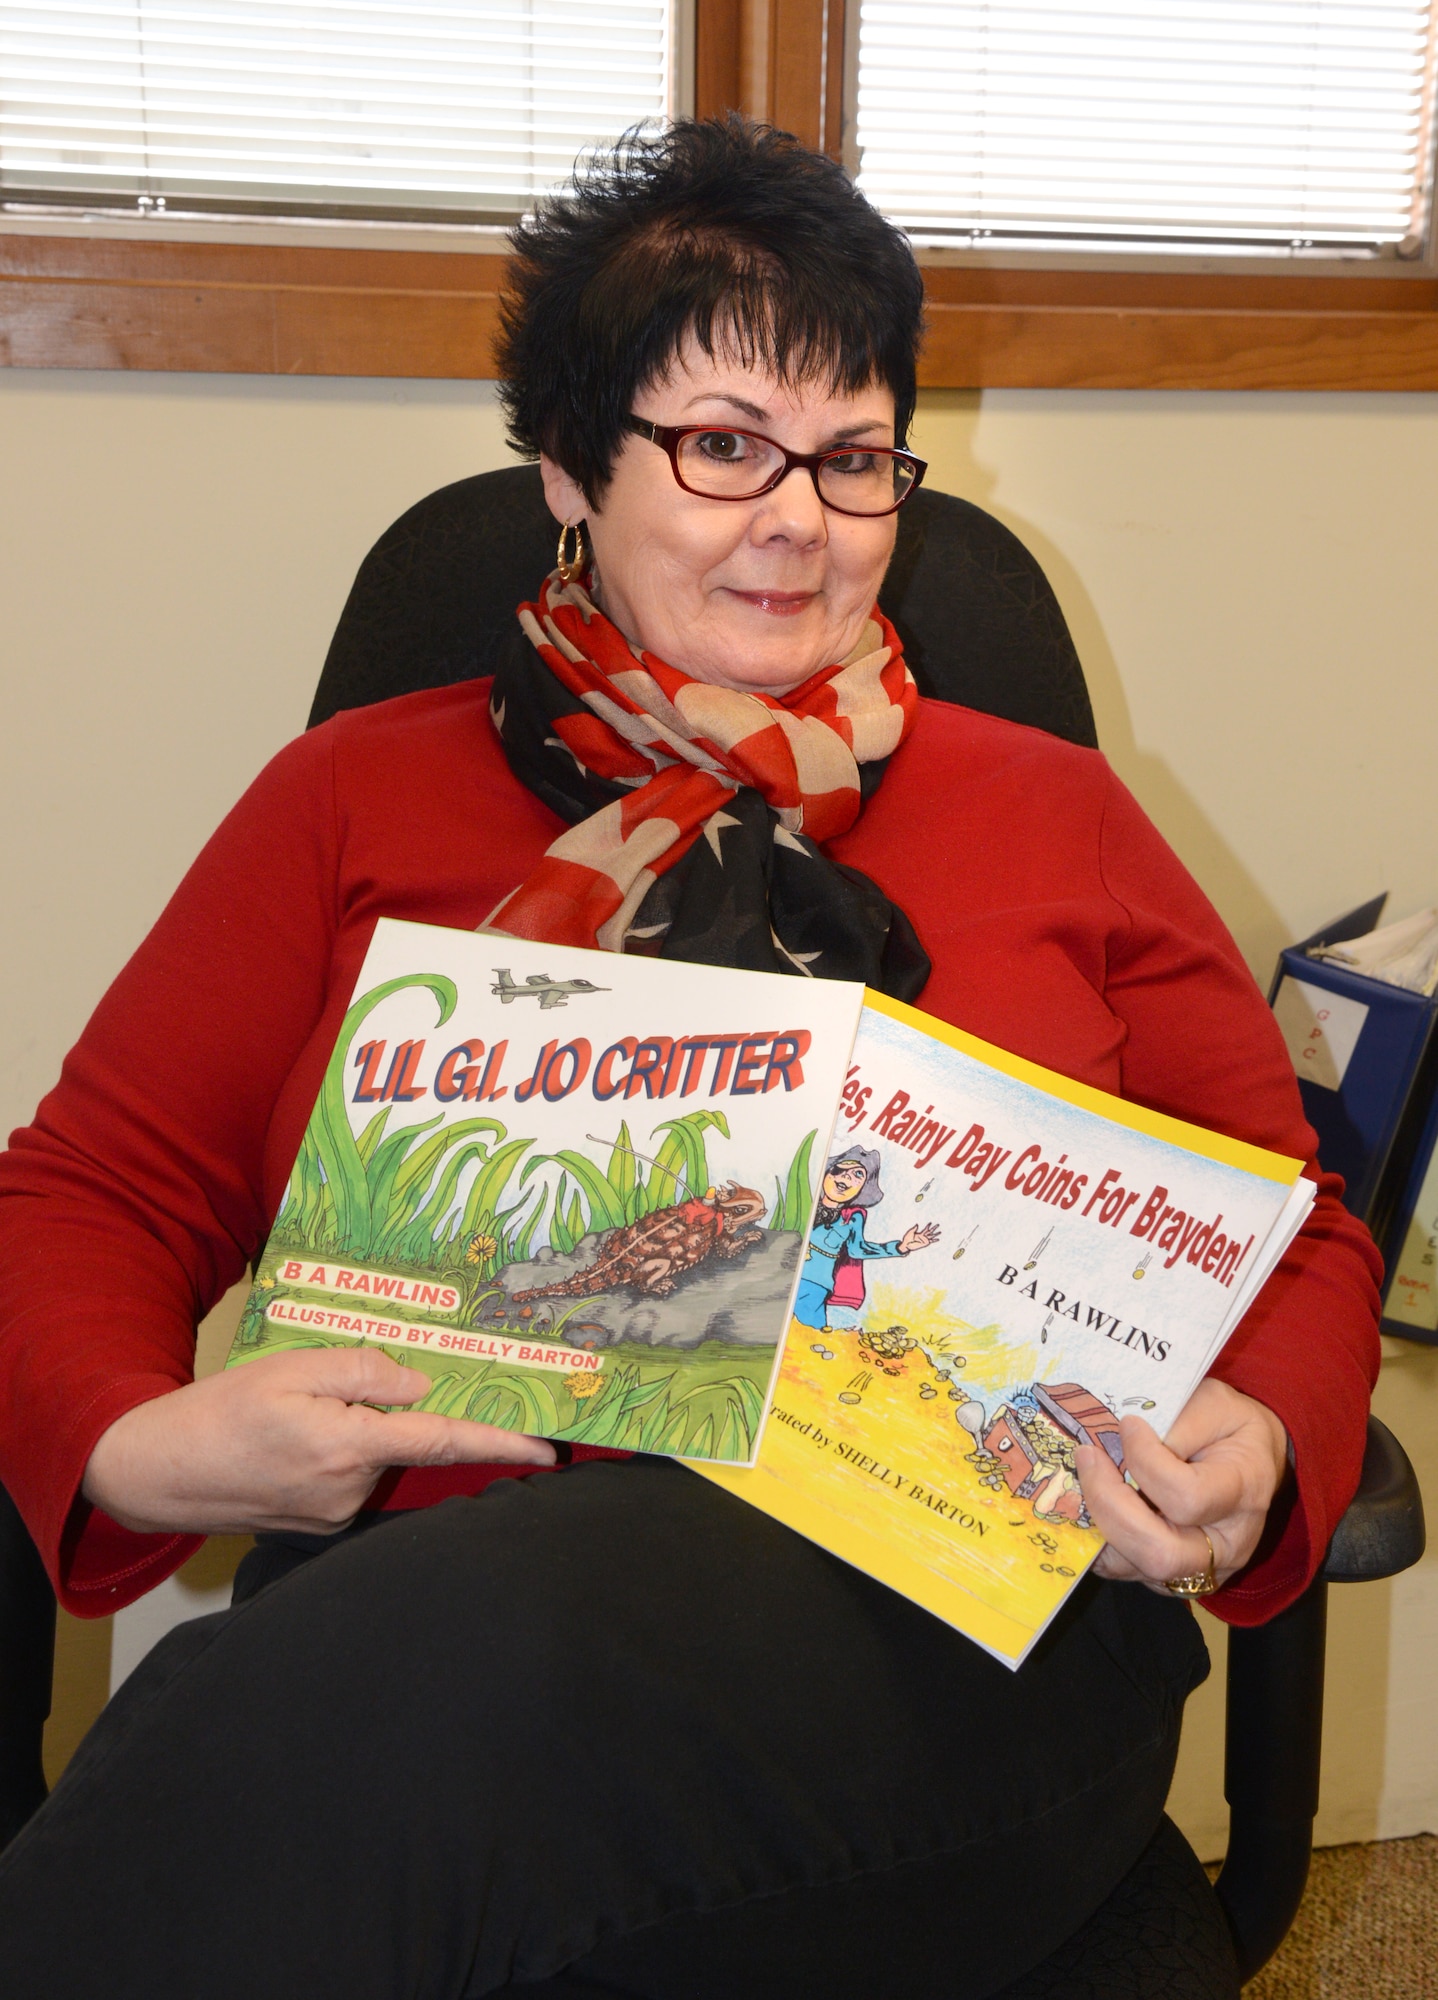 Brenda Rawlins is a government worker by day, children’s author by night. Her latest book, “Lil’ G.I. Jo Critter,” is based on the horned lizards that live at Tinker.  (Air Force photo by Kelly White)